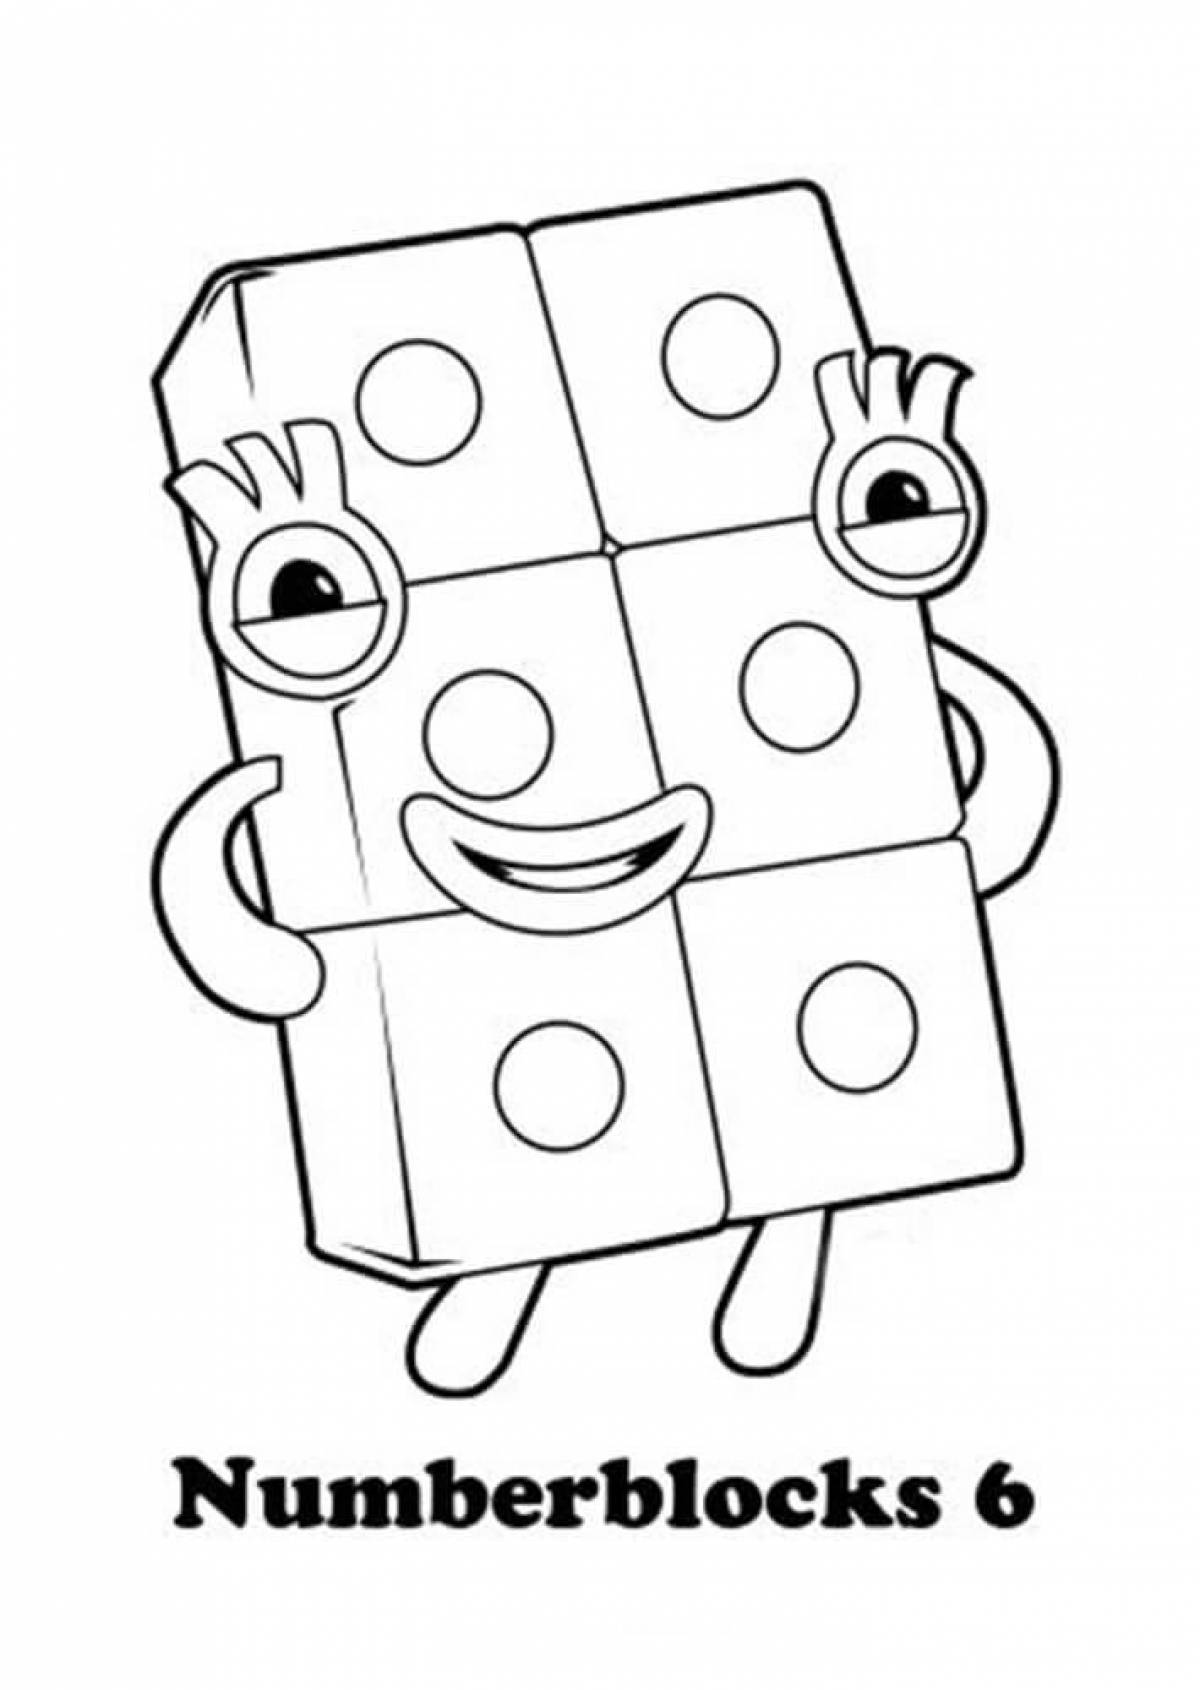 Creative coloring book with number blocks